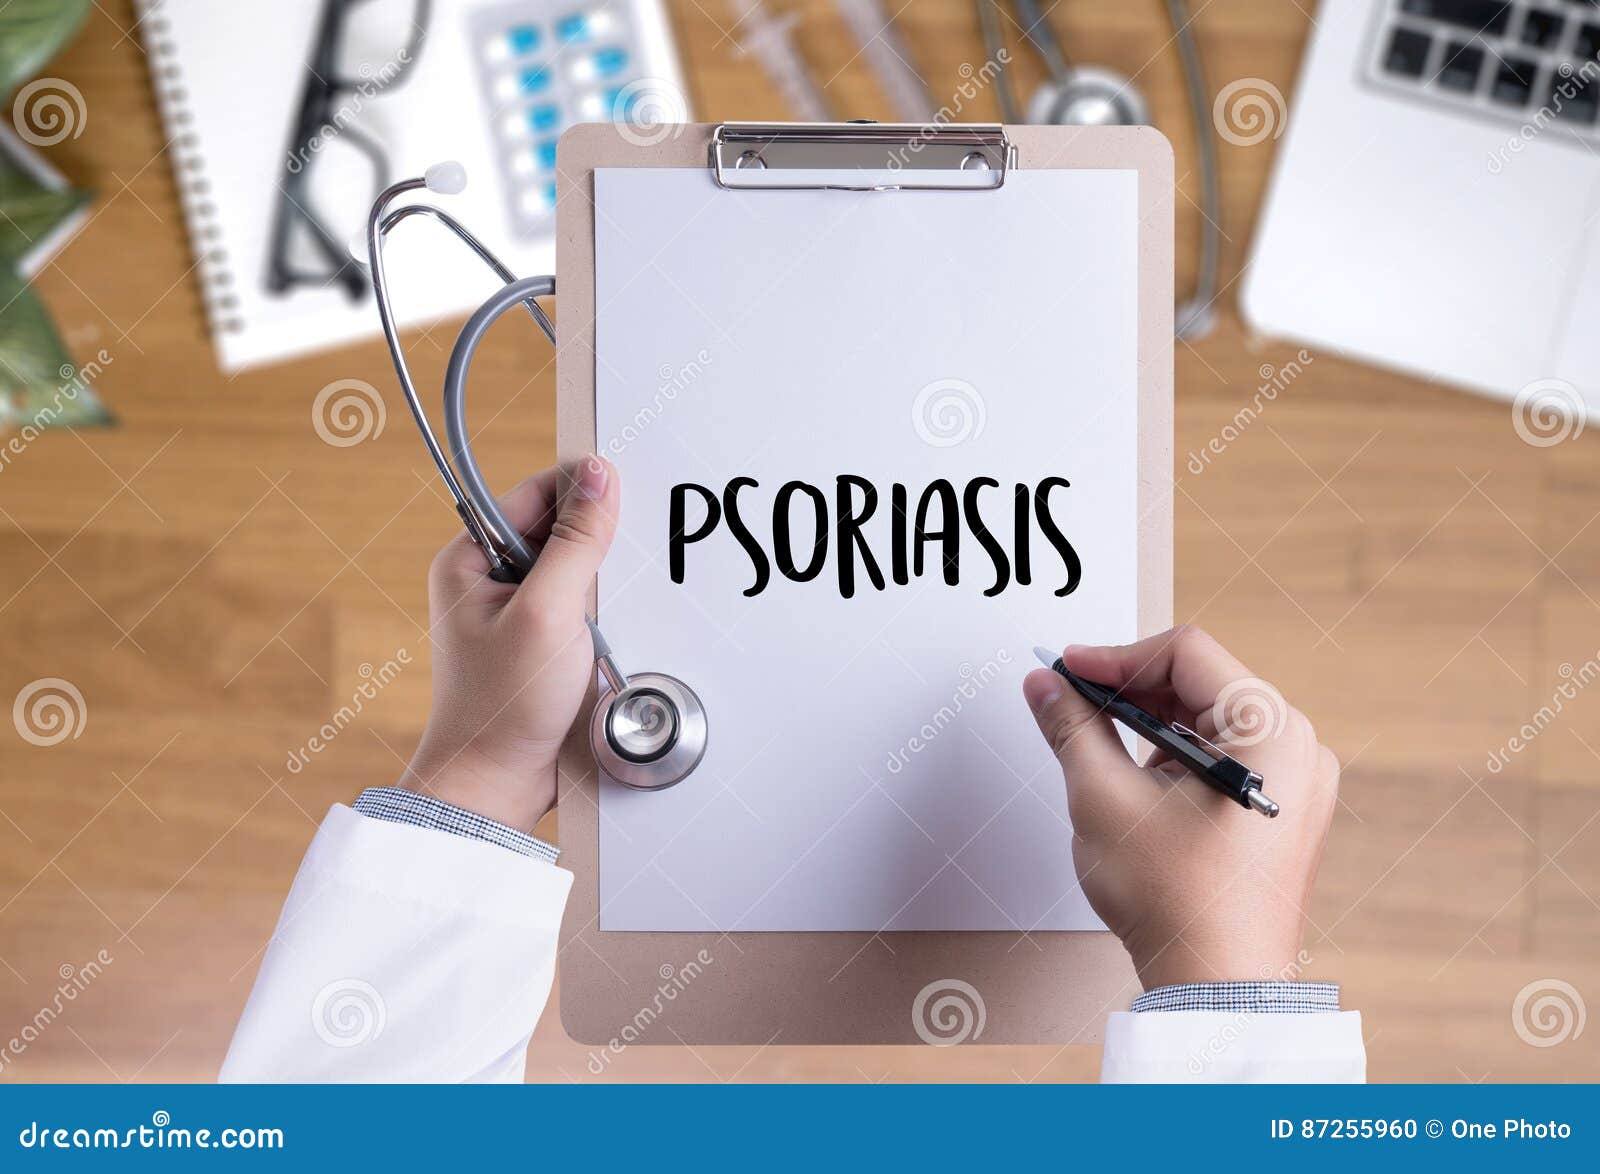 injections and syringe. psoriasis diagnosis, medical concept. co